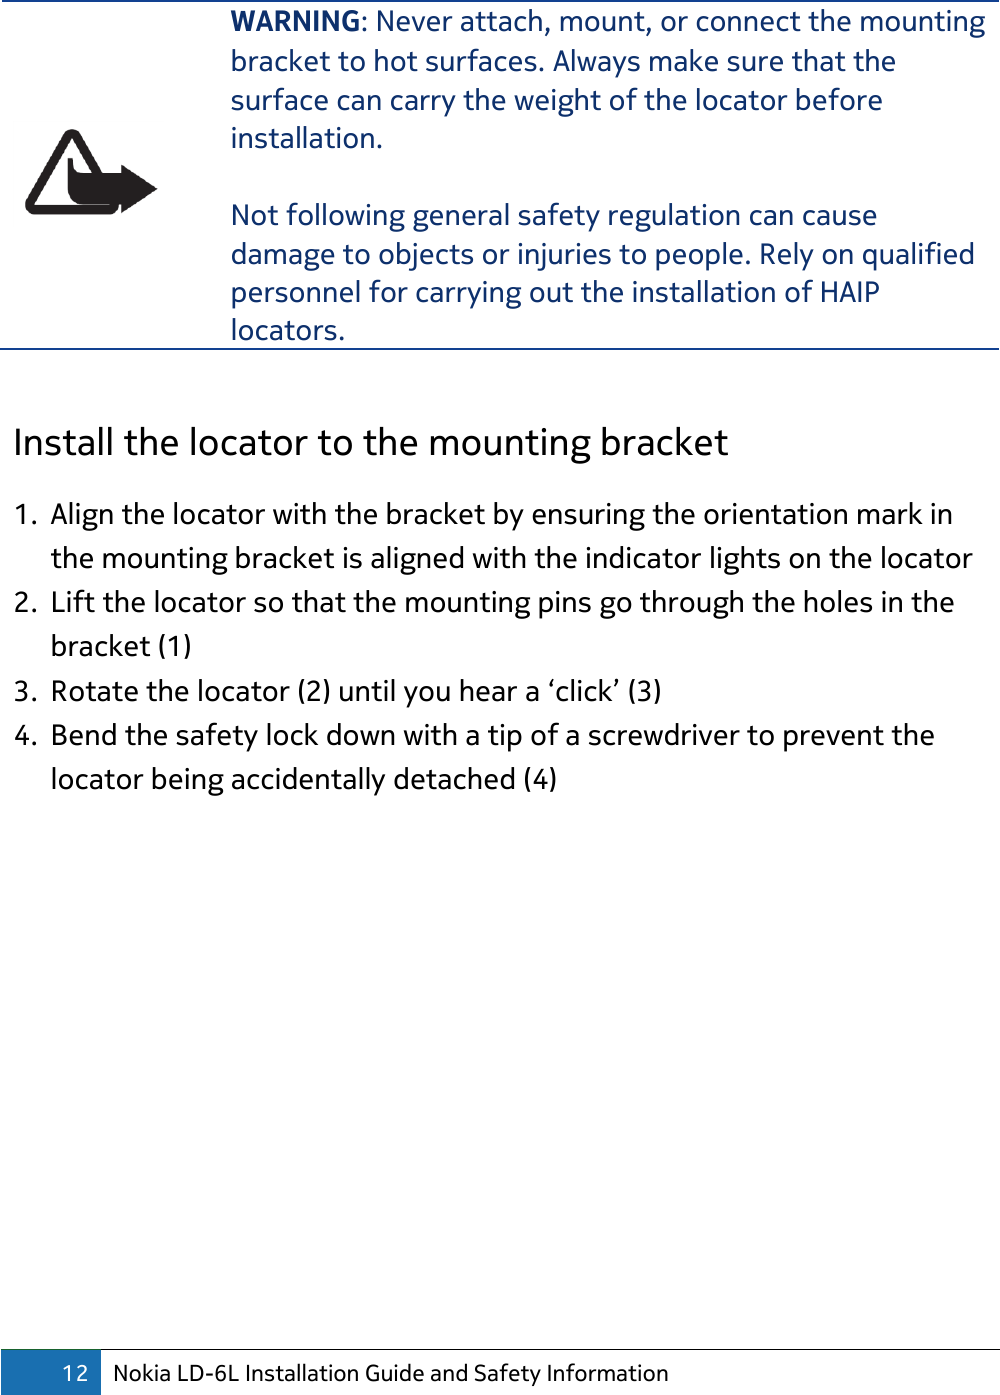 12 Nokia LD-6L Installation Guide and Safety Information   WARNING: Never attach, mount, or connect the mounting bracket to hot surfaces. Always make sure that the surface can carry the weight of the locator before installation.  Not following general safety regulation can cause damage to objects or injuries to people. Rely on qualified personnel for carrying out the installation of HAIP locators.  Install the locator to the mounting bracket 1. Align the locator with the bracket by ensuring the orientation mark in the mounting bracket is aligned with the indicator lights on the locator 2. Lift the locator so that the mounting pins go through the holes in the bracket (1) 3. Rotate the locator (2) until you hear a ‘click’ (3) 4. Bend the safety lock down with a tip of a screwdriver to prevent the locator being accidentally detached (4)  